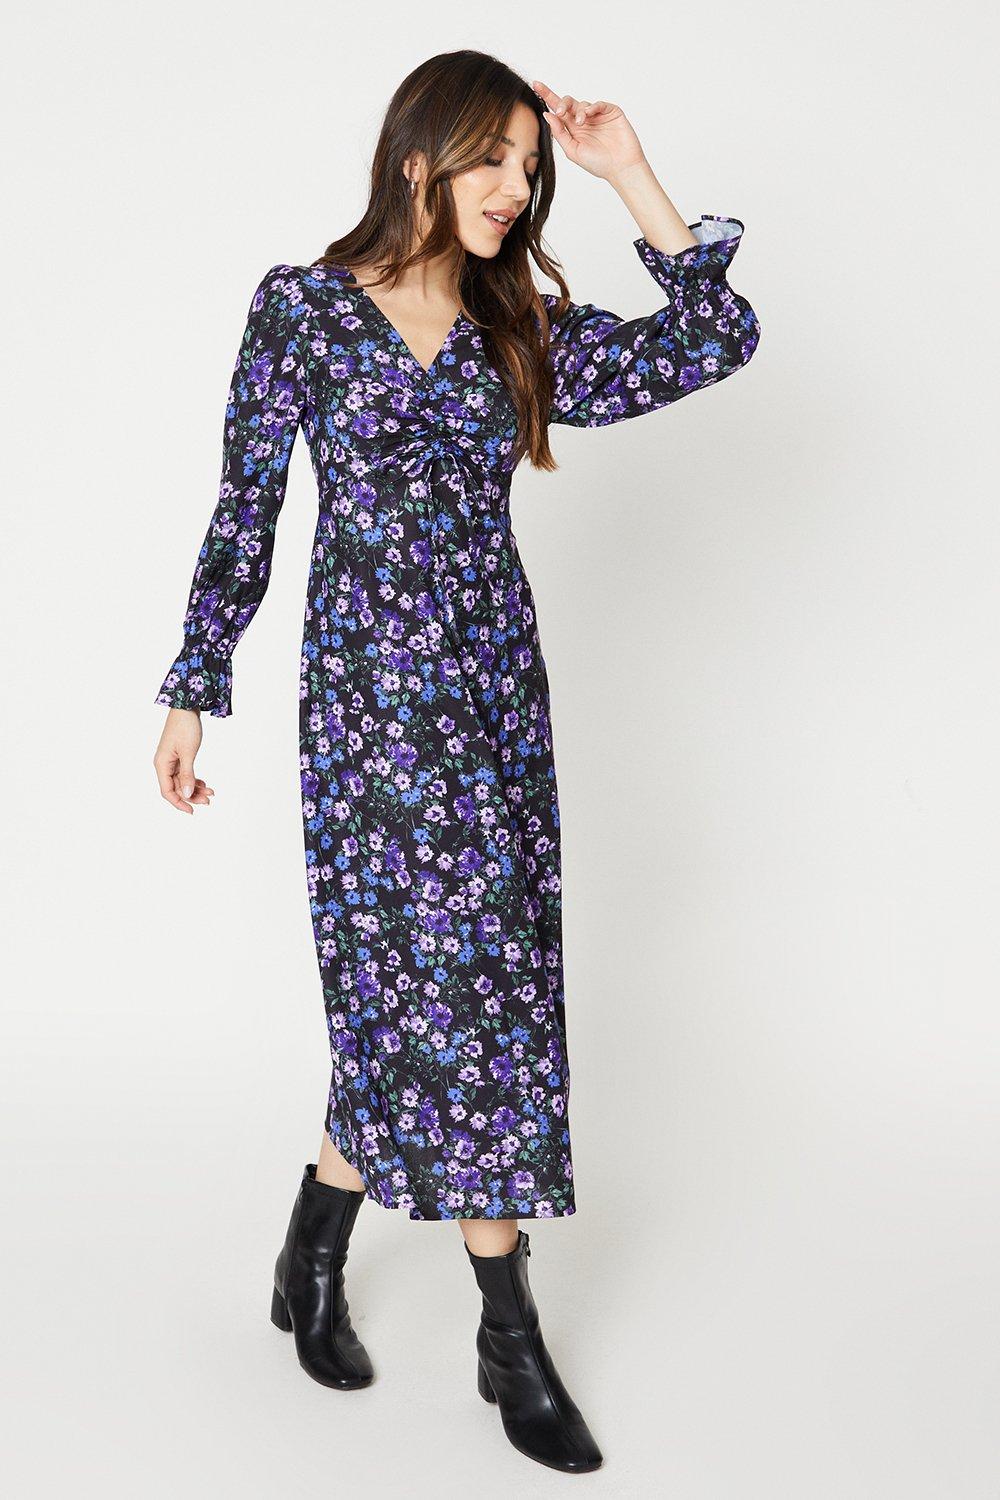 Women's Petite Floral Ruched Front V Neck Midi Dress - 4 product